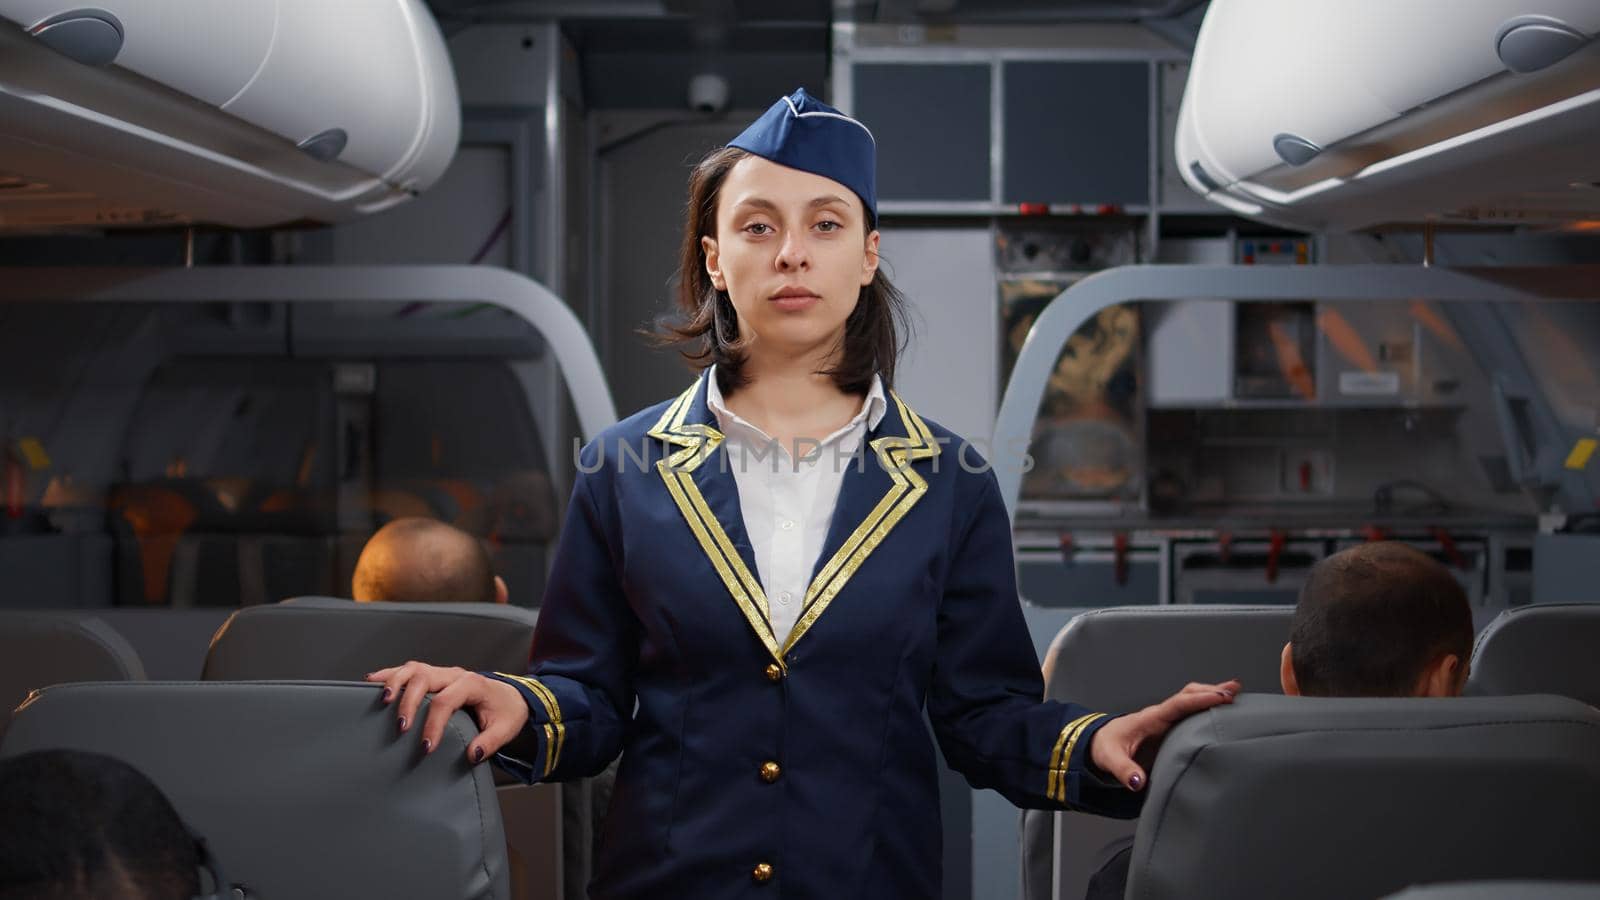 Portrait of woman stewardess in aviation uniform boarding people on airplane, helping with seats. Sitting on plane aisle to greet passengers on aircraft jet, international airline service.